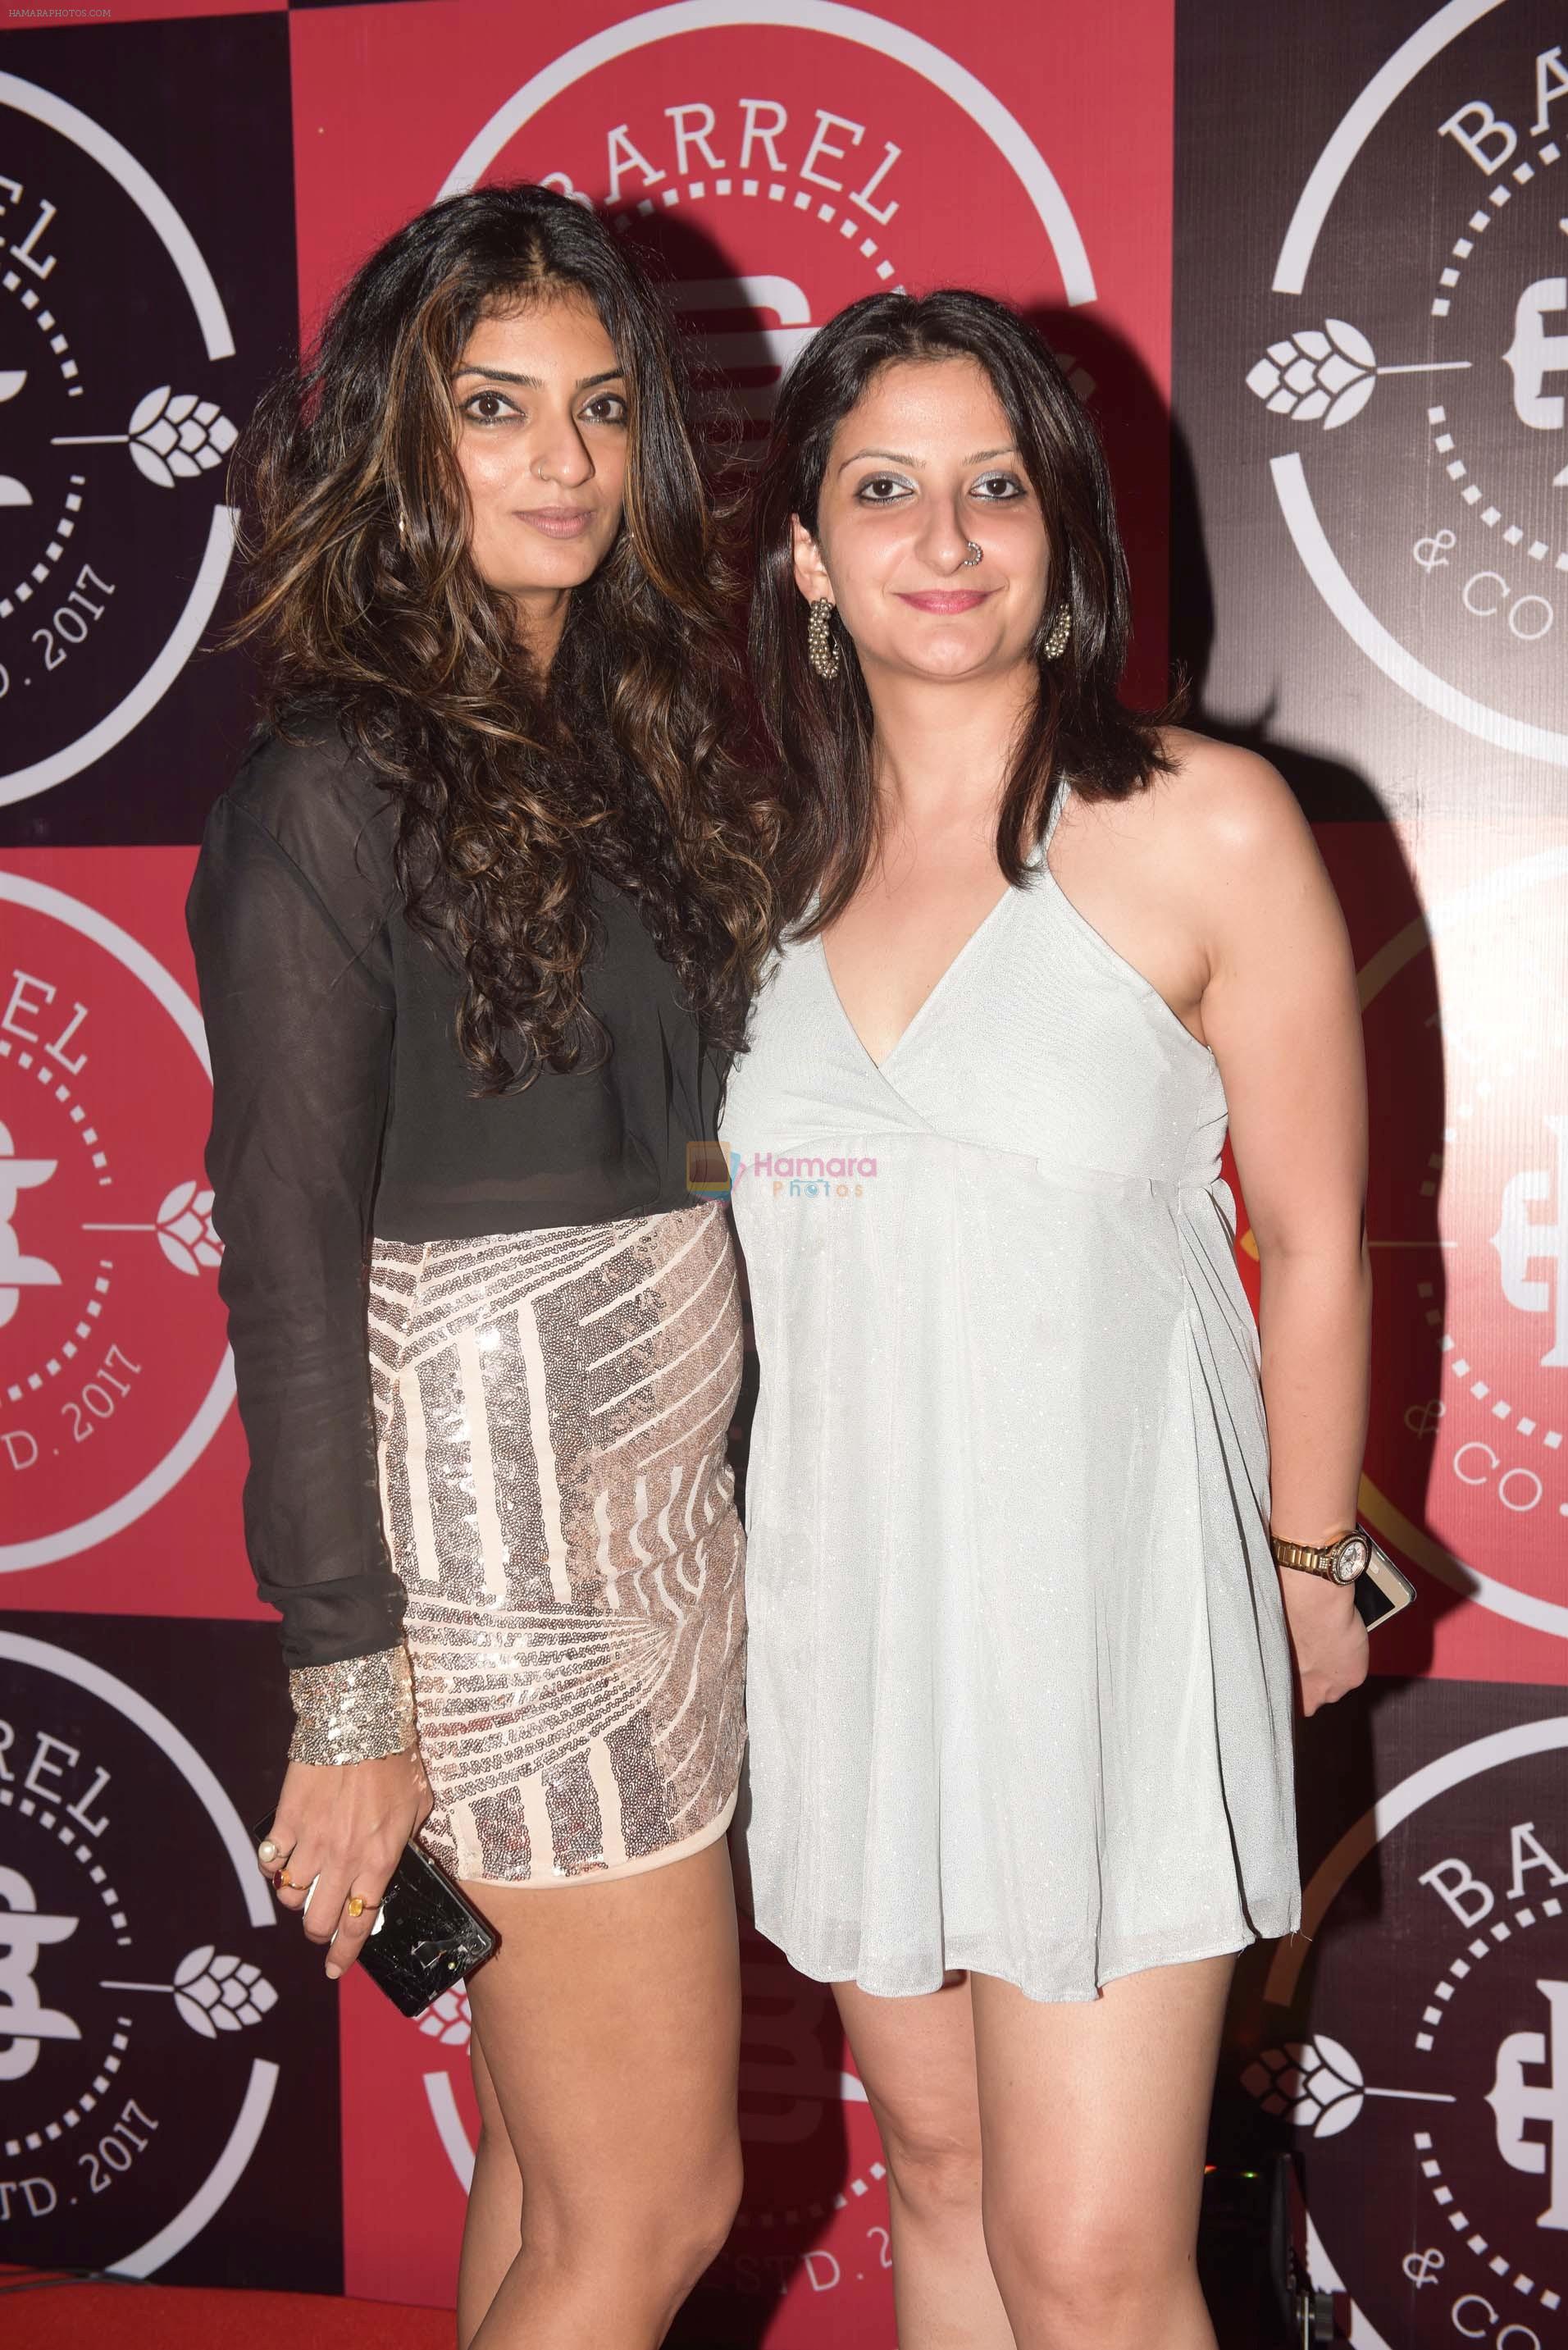 Shweta Menon and Sunaeyaa Kapur at the Launch Party of Barrel & Co on 7th Sept 2017